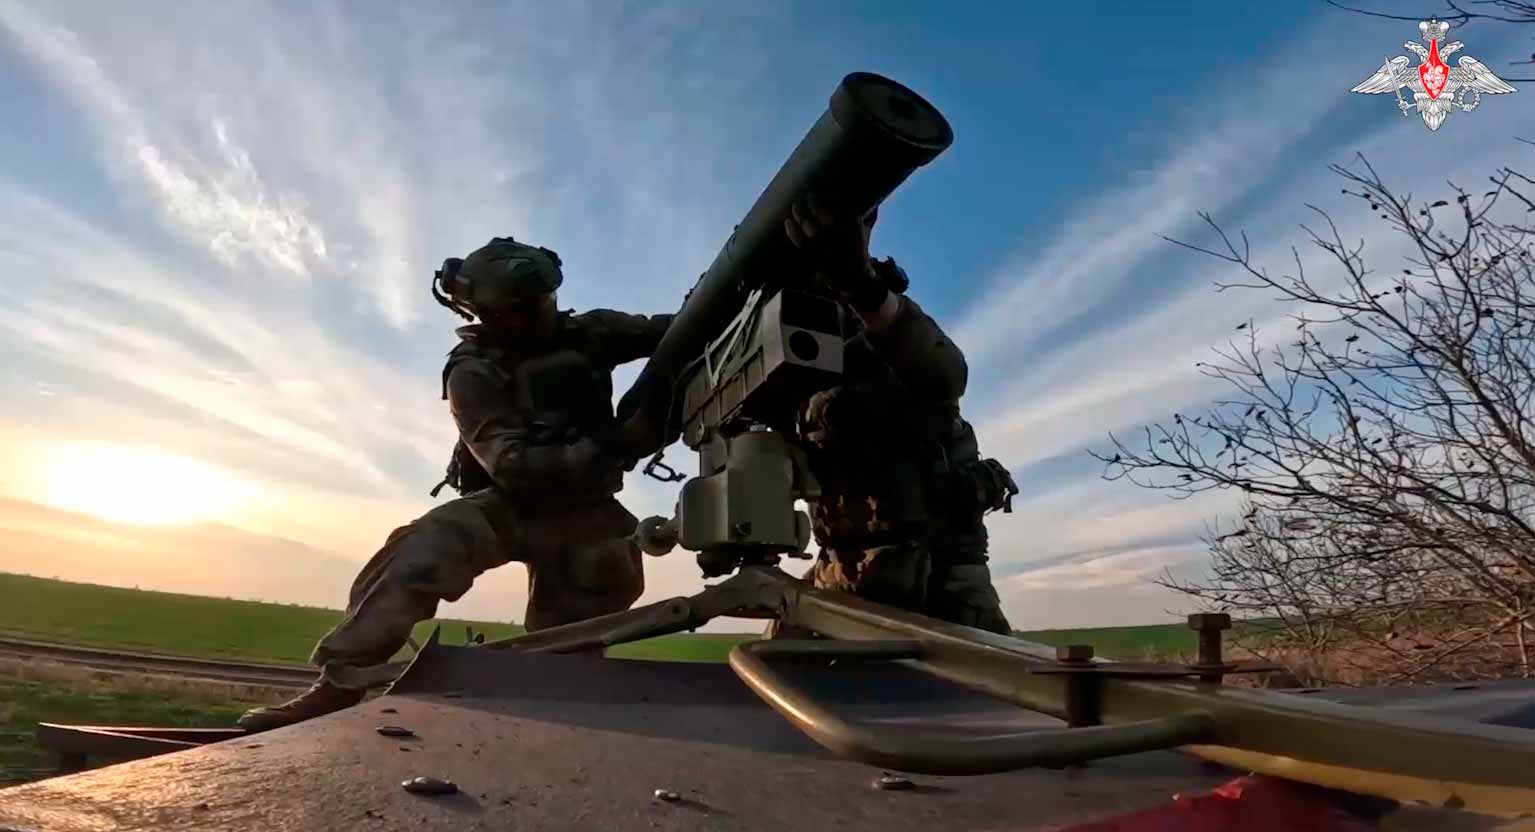 Russia publishes video of Mad Max-style buggy firing anti-tank missile at Ukrainian armored vehicles. Source and video: Telegram t.me/mod_russia 